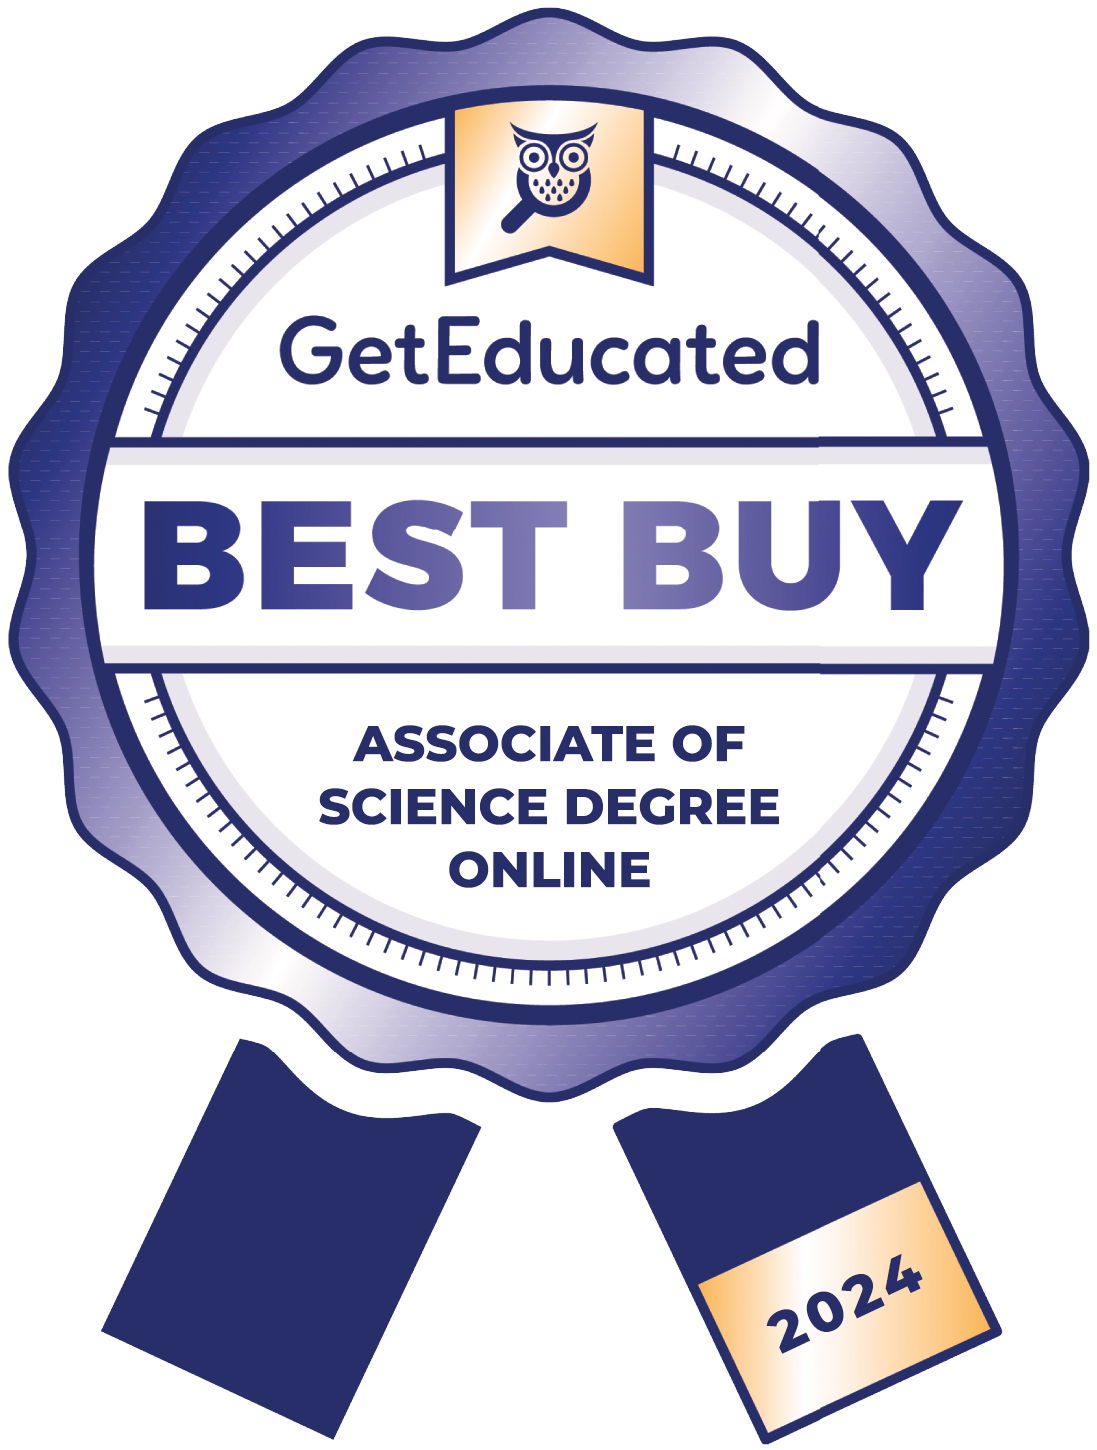 Rankings of the cheapest associate of science degree online programs